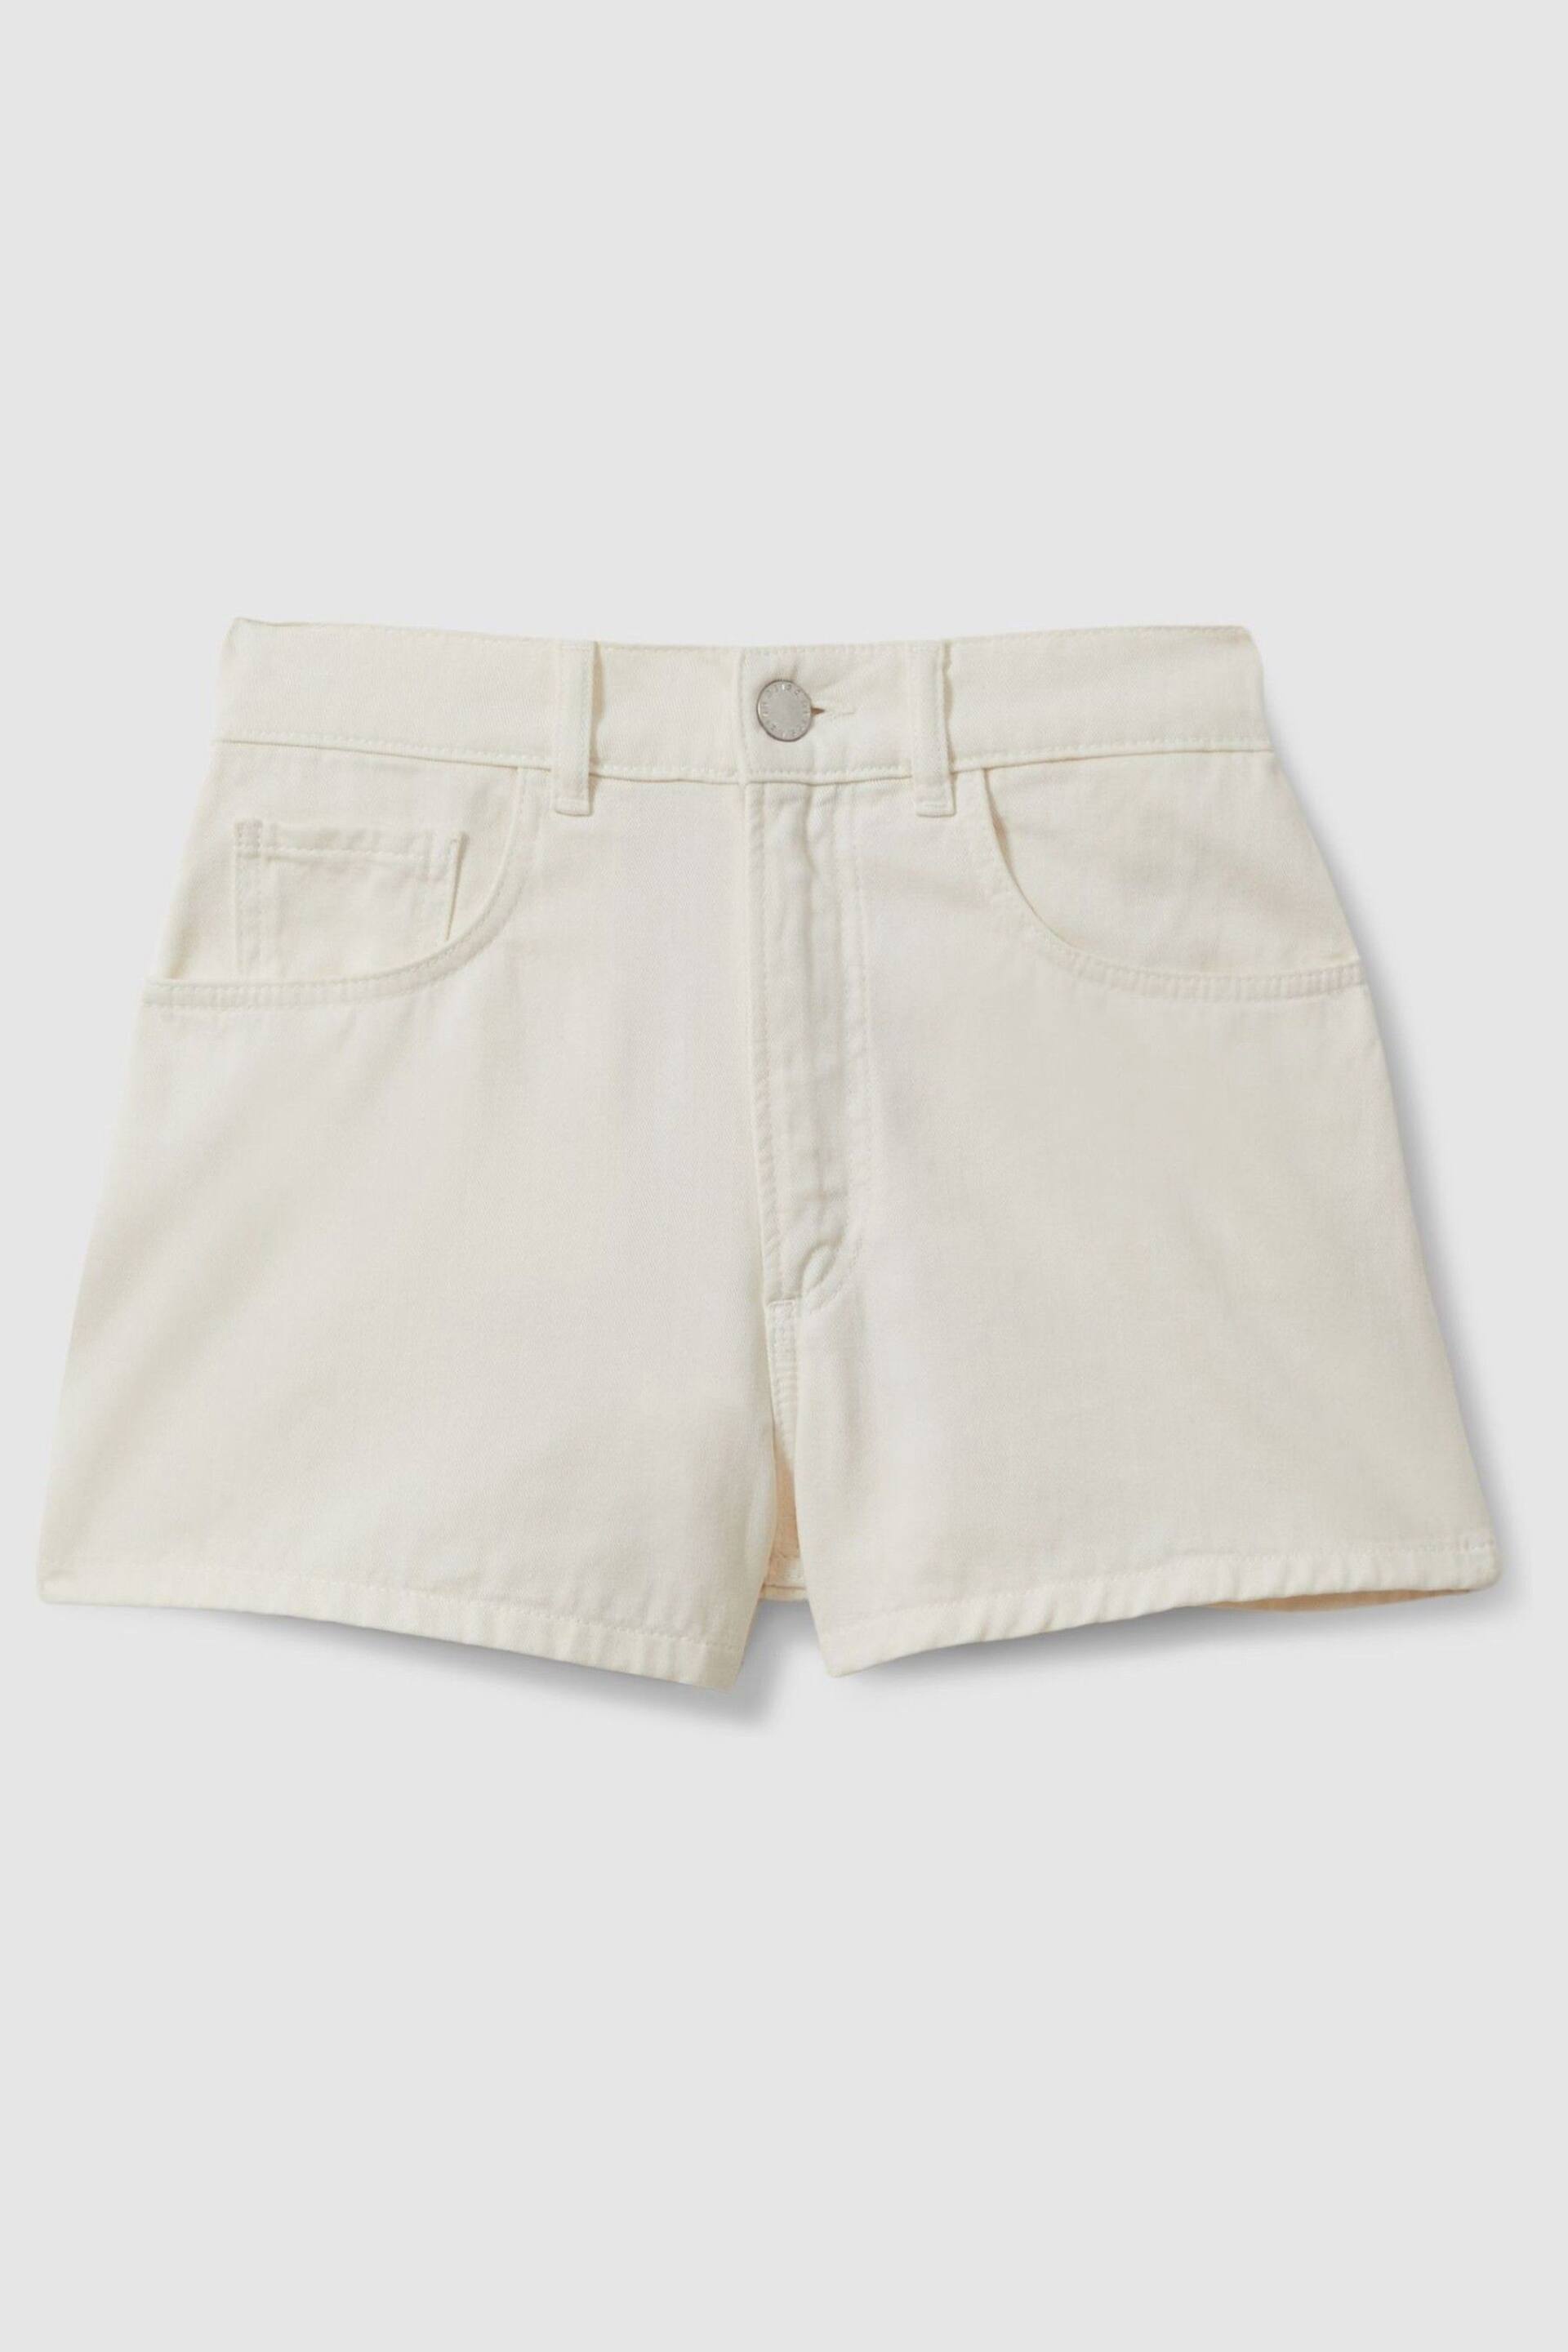 Reiss Cream Colorado Garment Dyed Shorts - Image 2 of 6